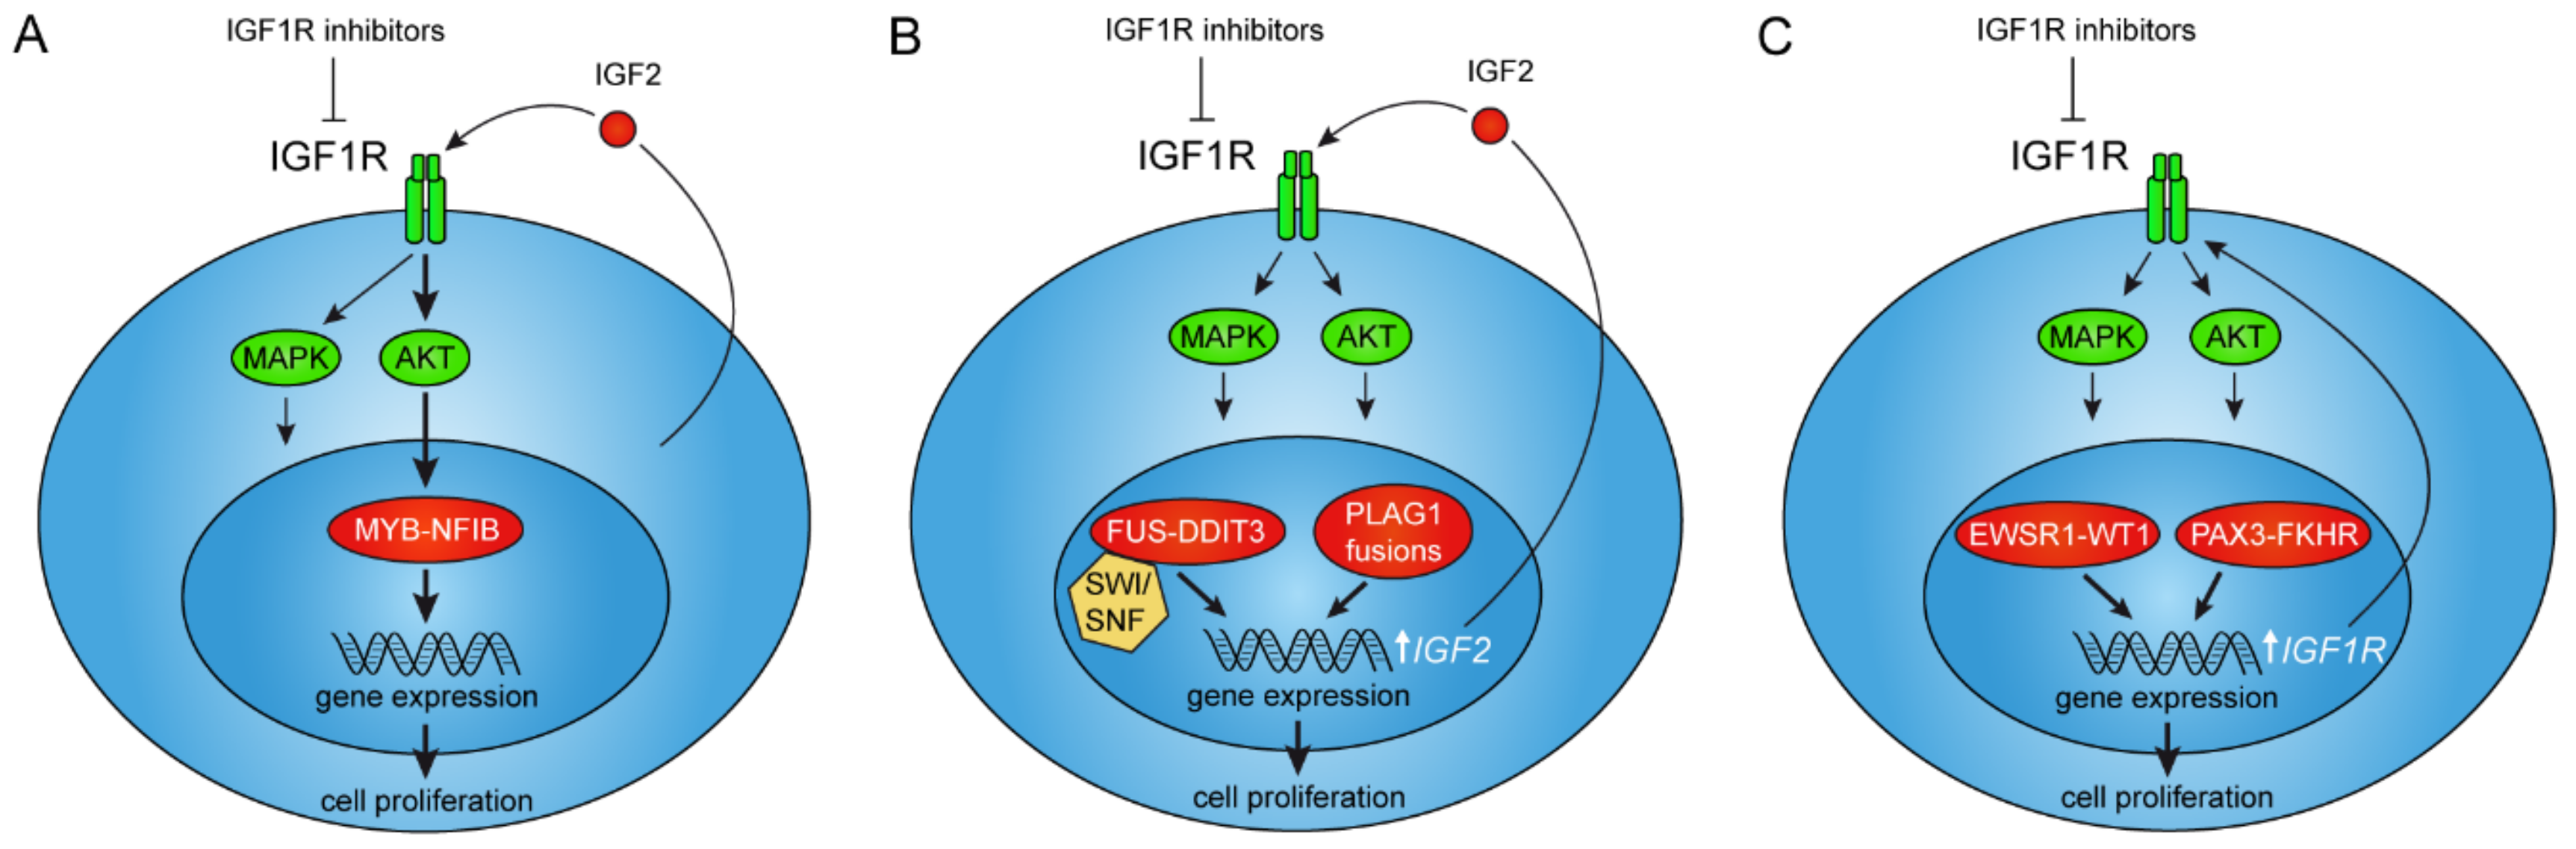 Cells | Free Full-Text | IGF2/IGF1R Signaling as a Therapeutic Target in  MYB-Positive Adenoid Cystic Carcinomas and Other Fusion Gene-Driven Tumors